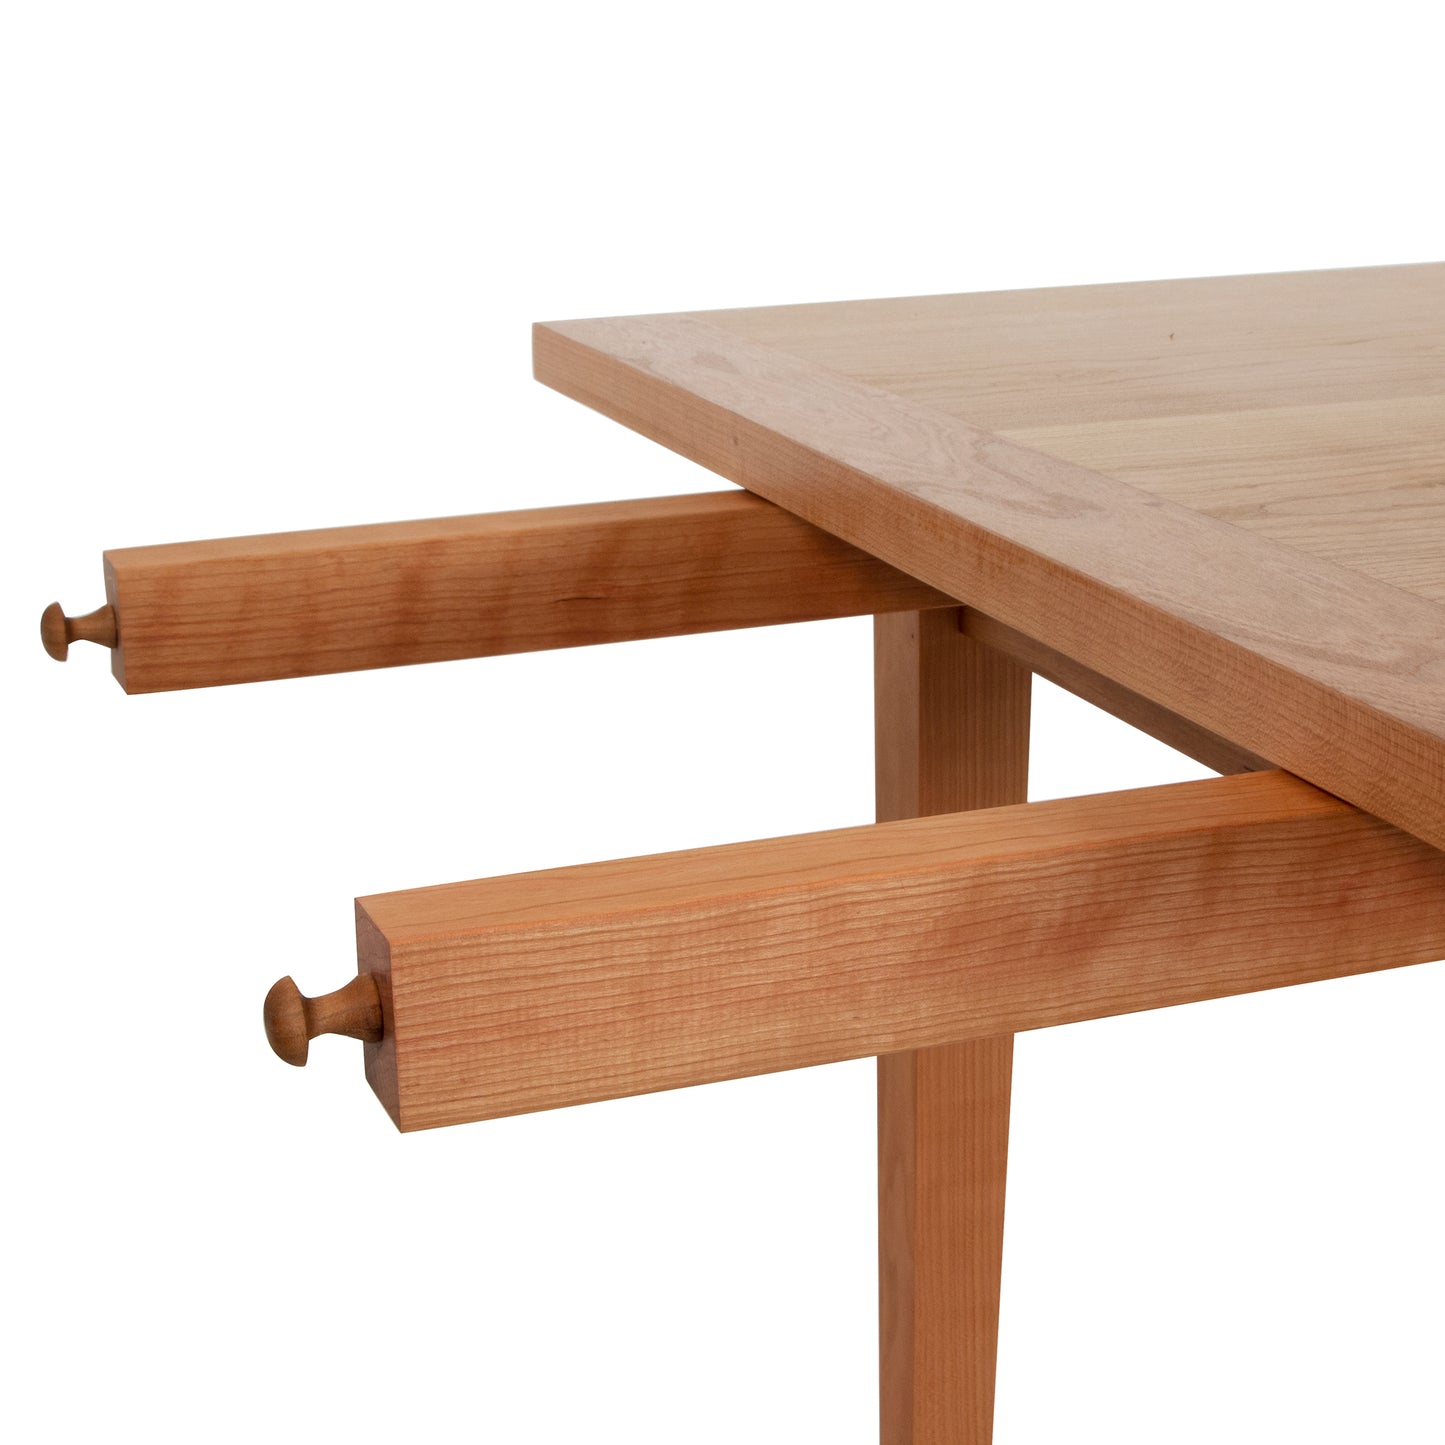 A warm Maple Corner Woodworks Vermont Shaker Harvest Extension Dining Table with two wooden legs.